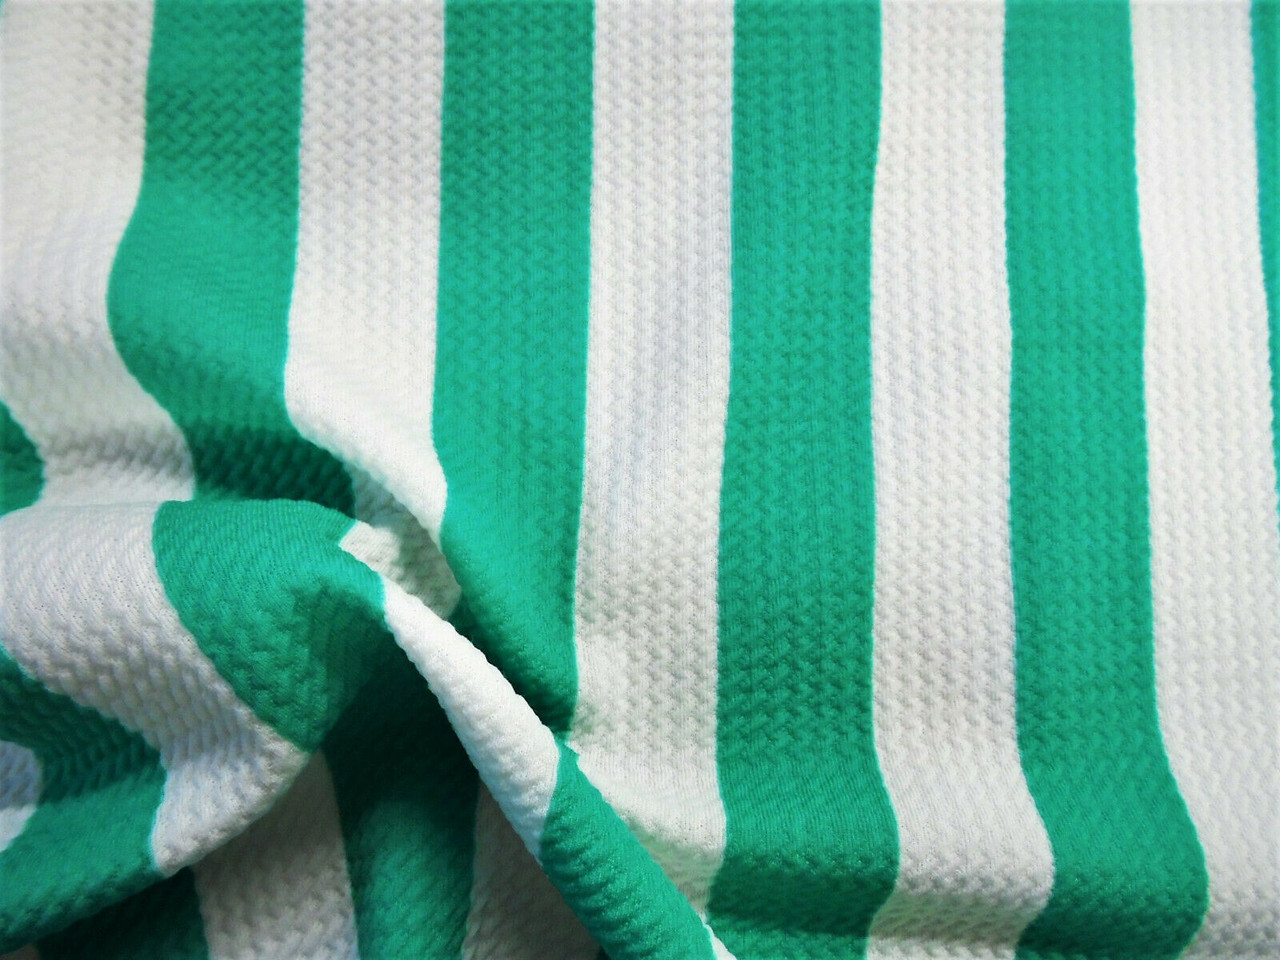 Bullet Printed Liverpool Textured Fabric Stretch Mint Green White 1 inch Stripe P12